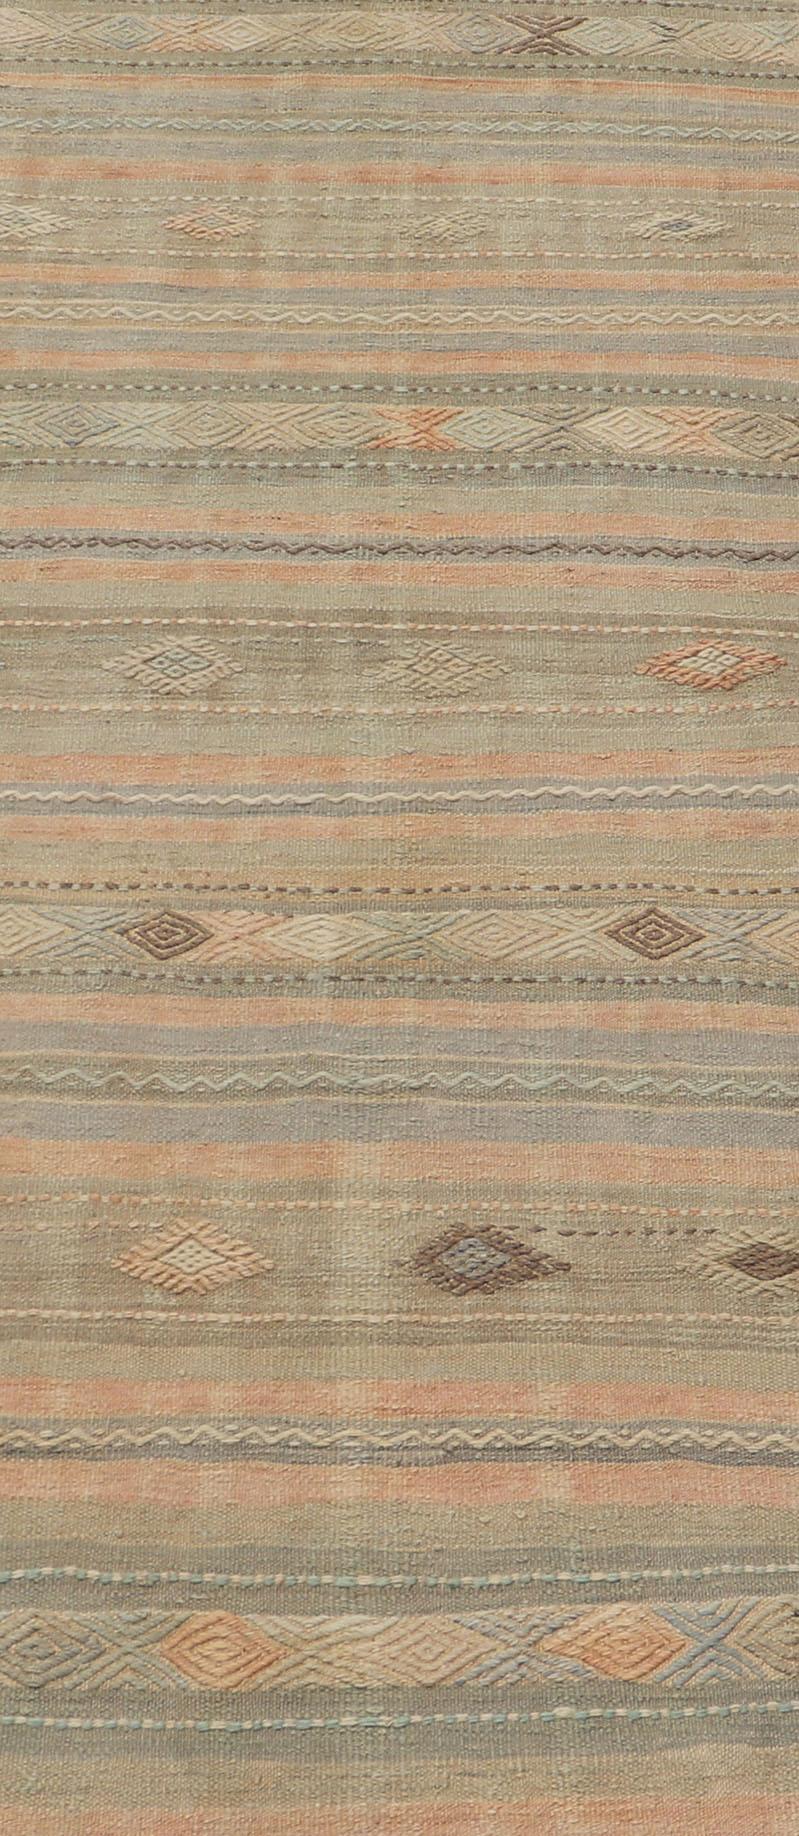 Measures: 2'9 x 7'11 
Stripe vintage Turkish Kilim flat-weave runner with Geometric Tribal Design. Keivan Woven Arts / rug TU-NED-5032, country of origin / type: Turkey / Kilim, circa 1960
This Kilim runner from Turkey features a striped design of